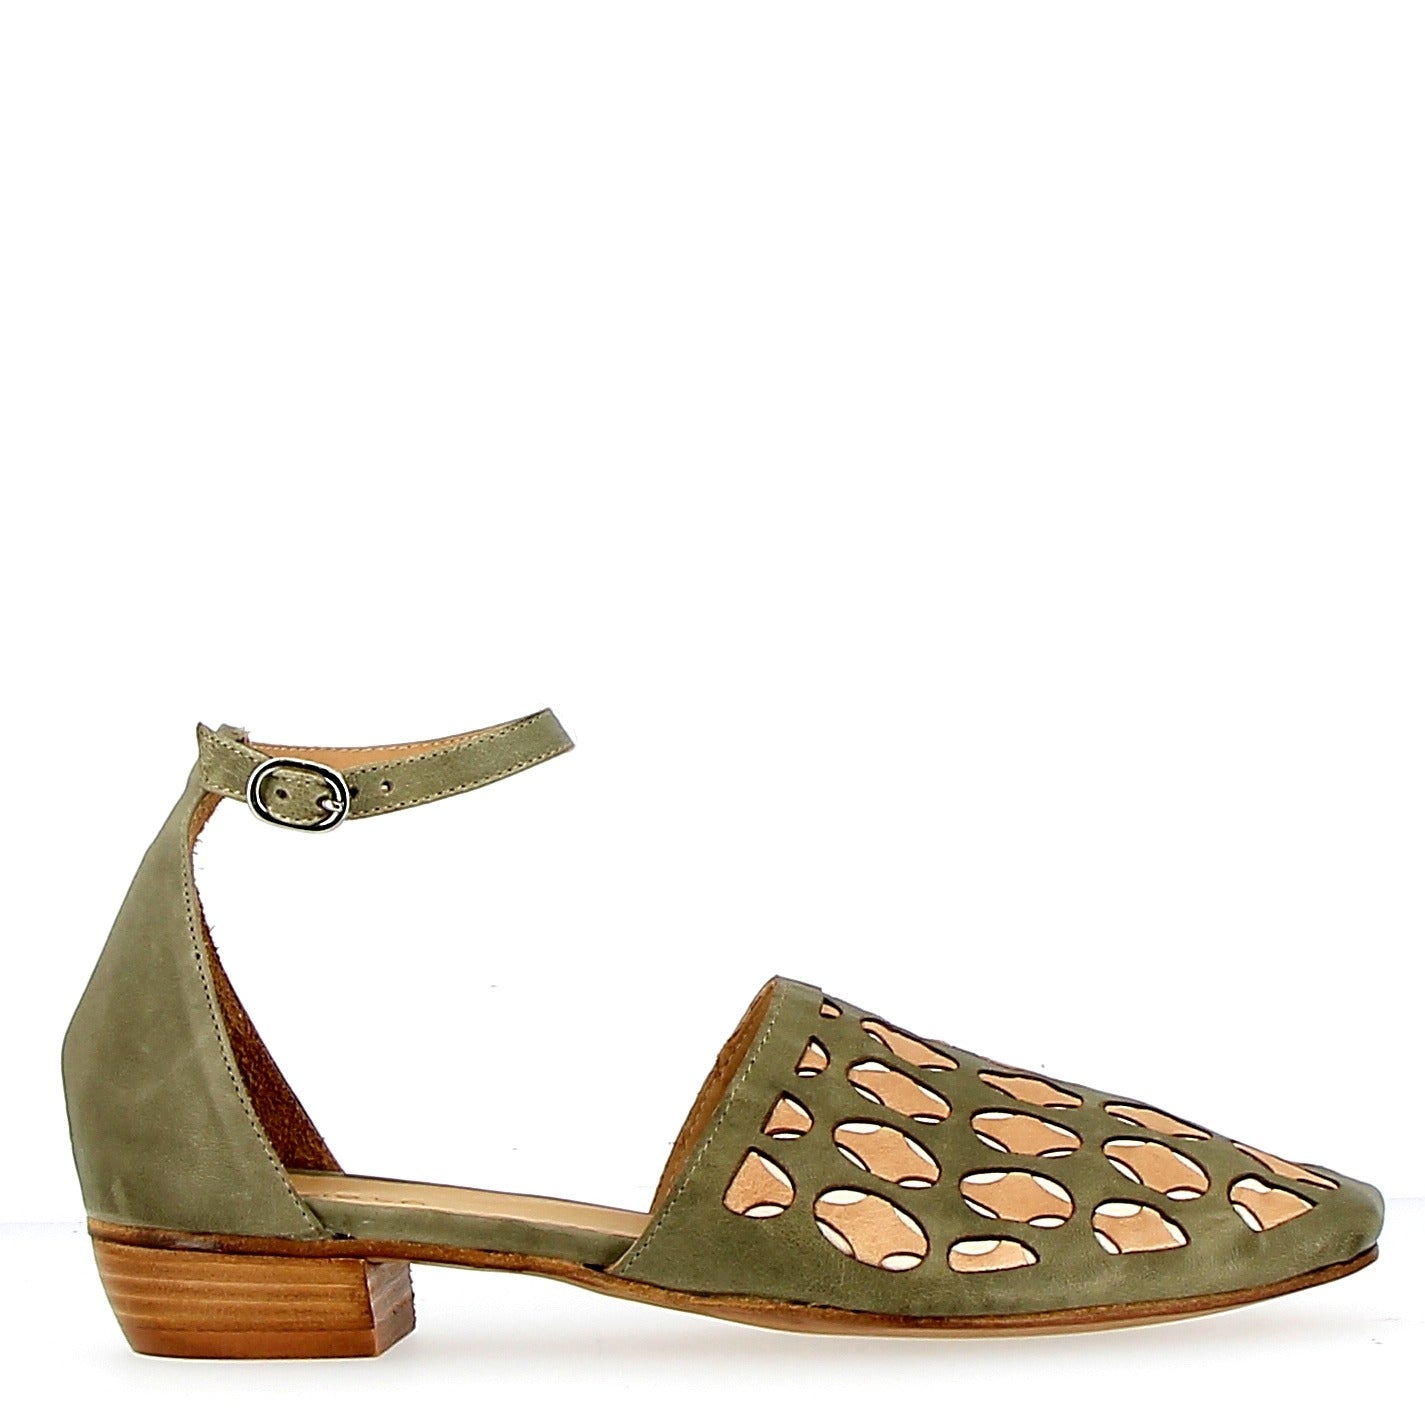 Sage green and beige closed toe sandal